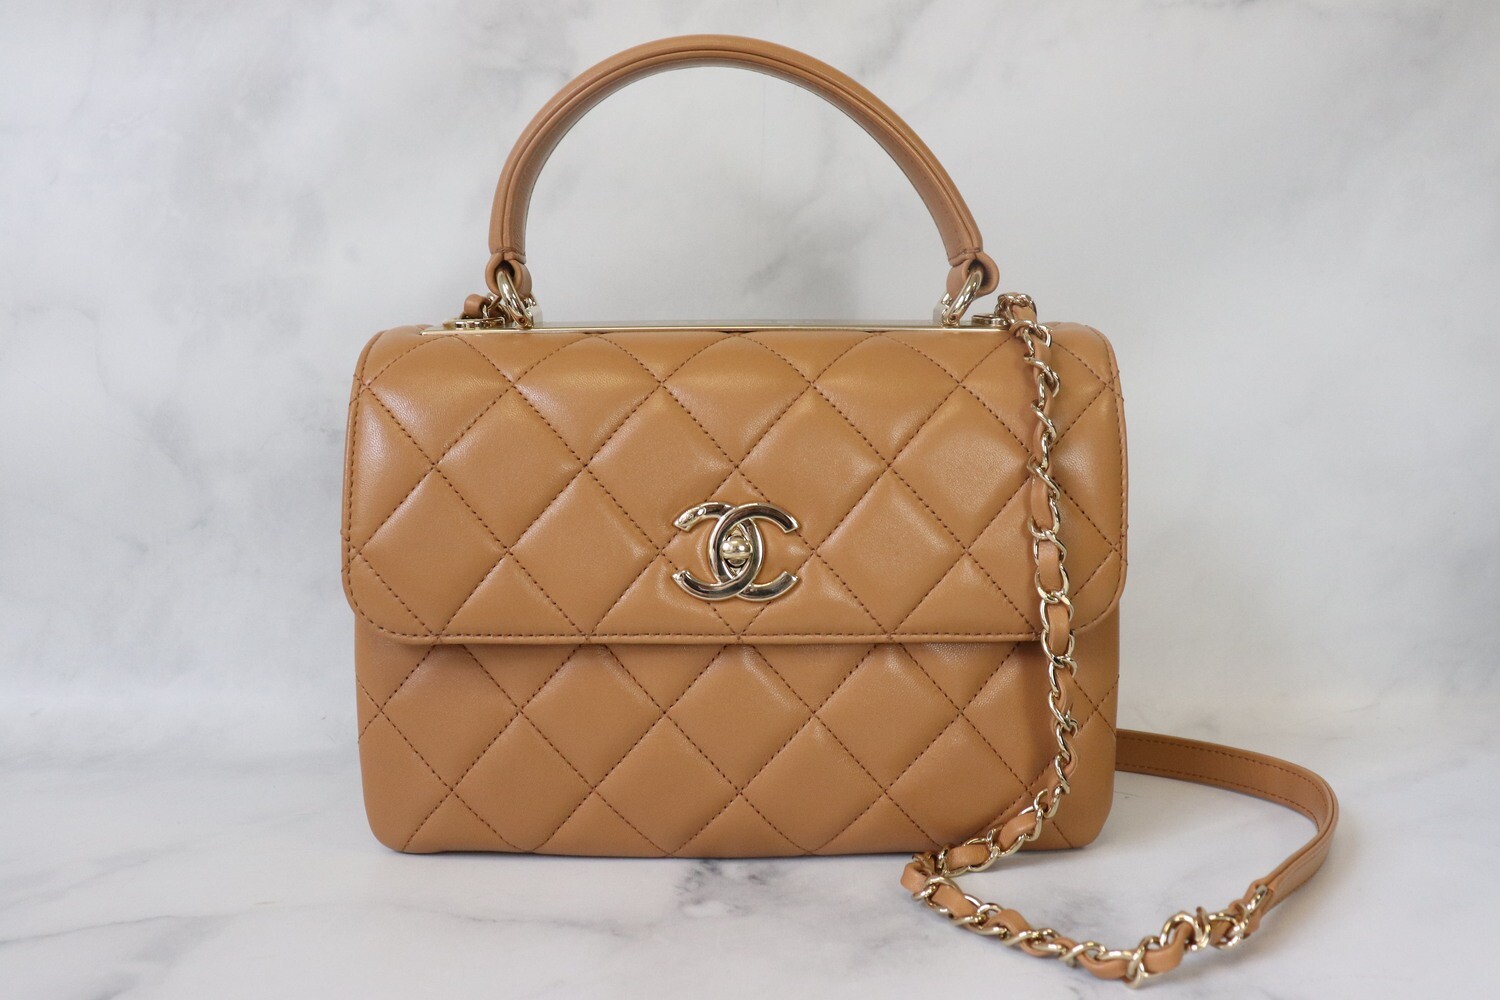 Chanel Trendy Small 19K Caramel Leather, Gold Hardware, Preowned in Box